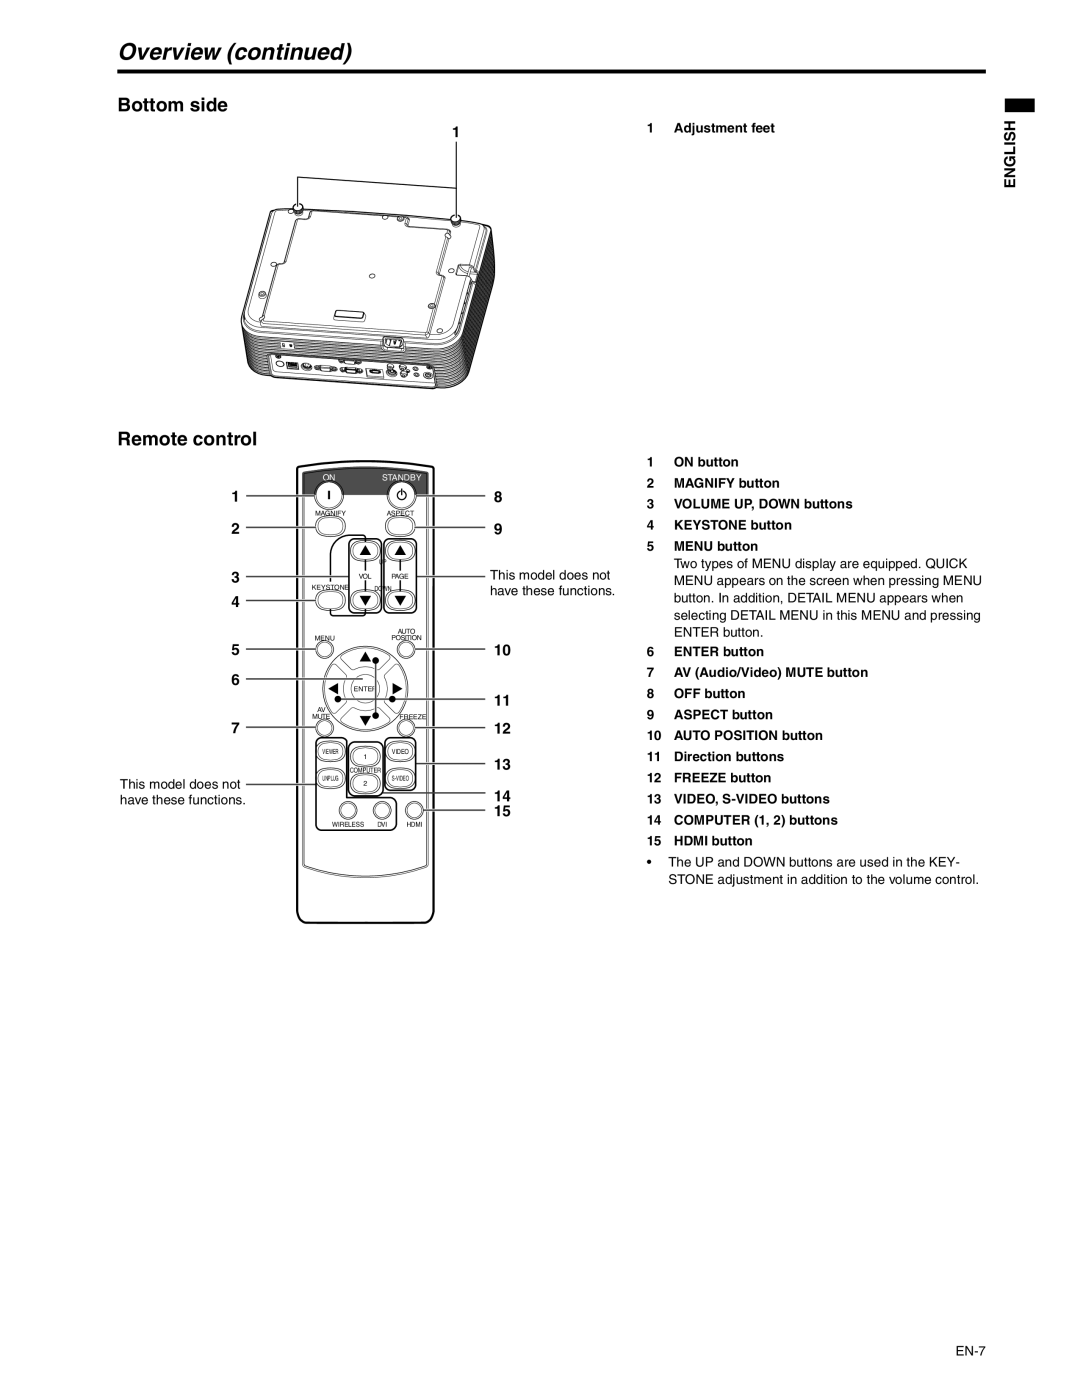 Mitsubishi Electronics XD250U-ST user manual Overview continued, Bottom side Remote control, English 